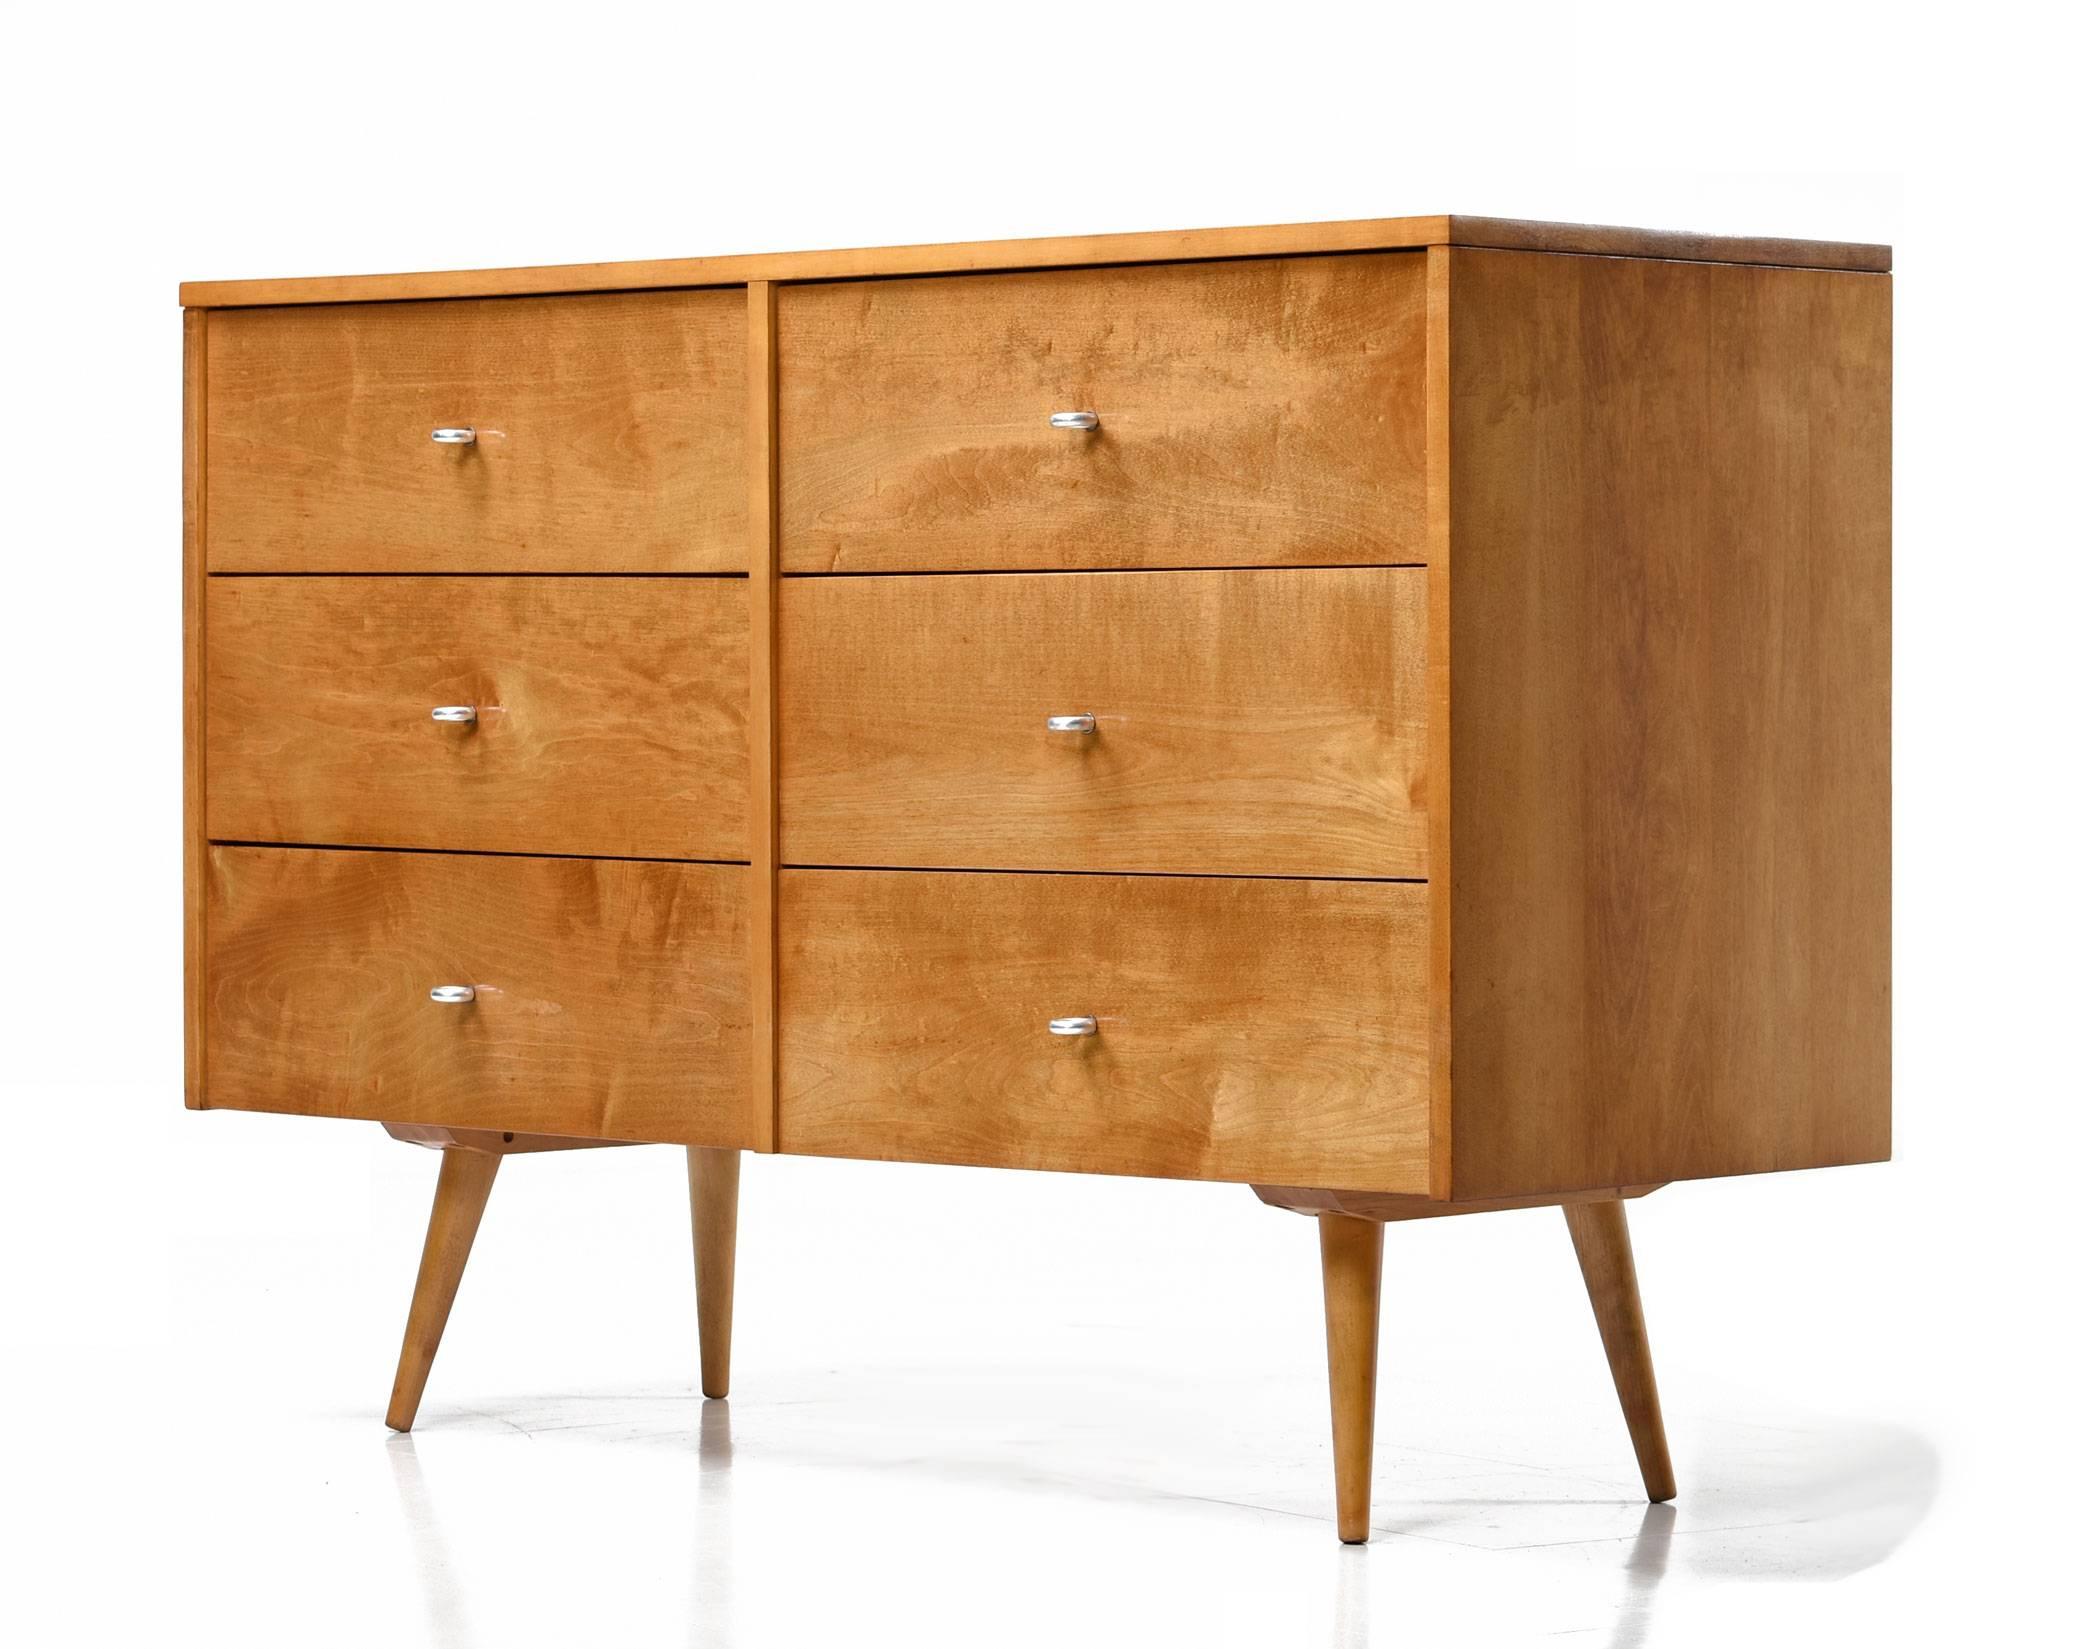 Mid-Century Modern dresser by Paul McCobb for Planner Group. This unit has been completely refinished. The six-drawer design is enhanced with loop shaped pulls. Solid wood construction, American made, Minimalist design accomplished by one of